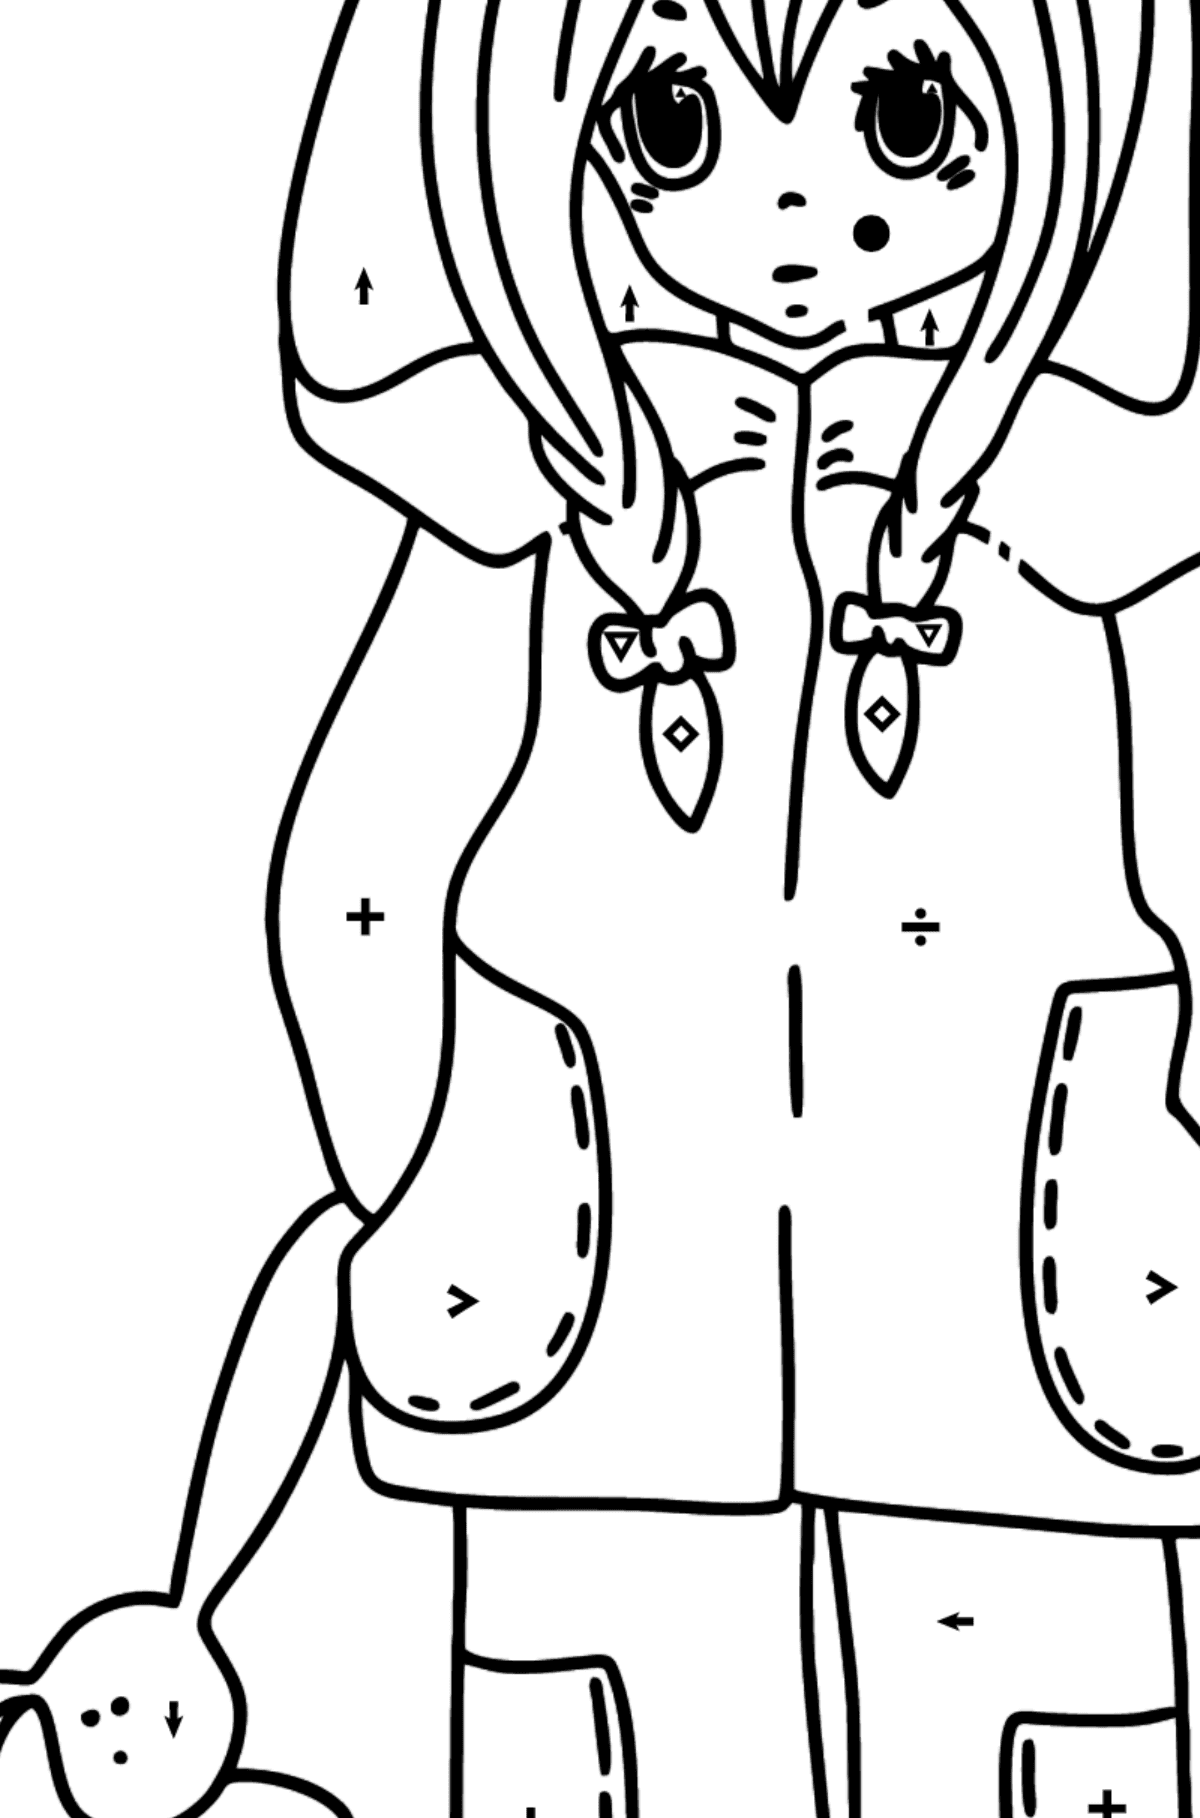 Anime girl with pigtails coloring page - Coloring by Symbols for Kids